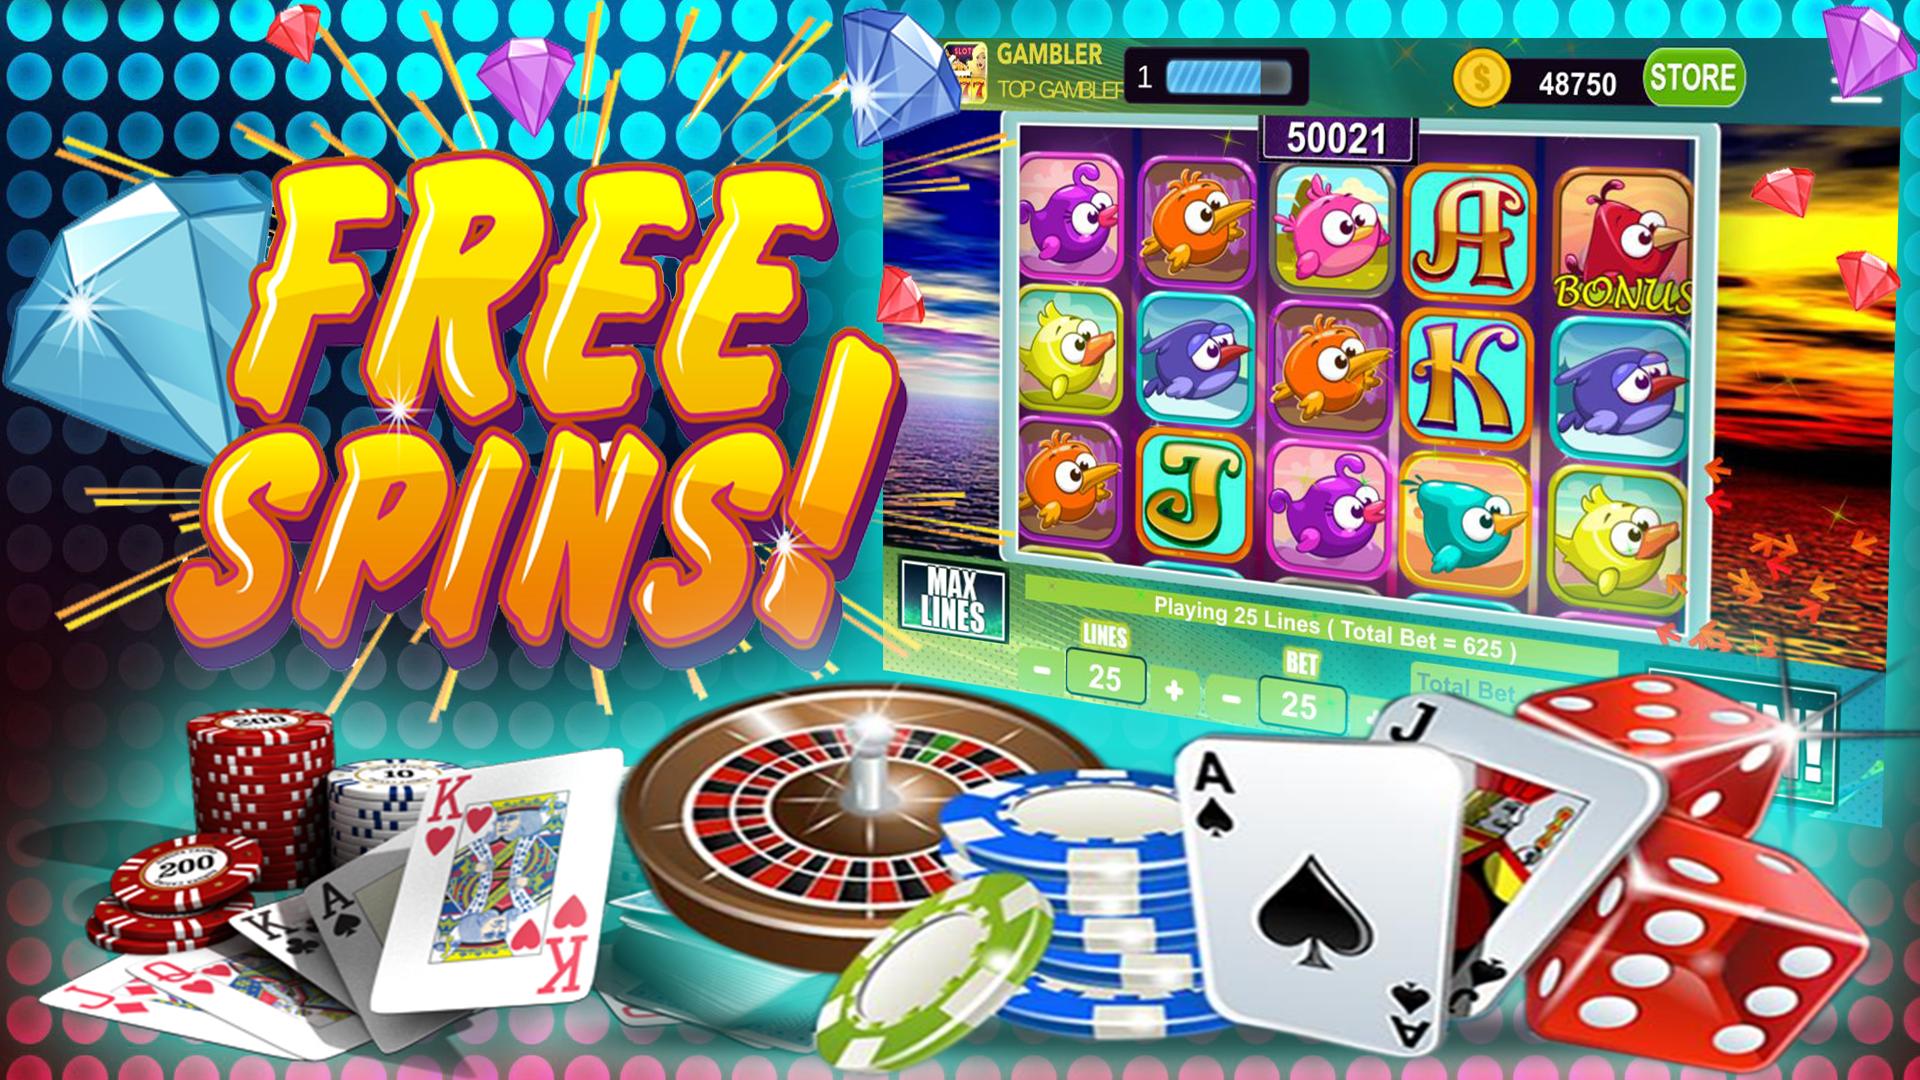 How to spend less money on slot games? – Promo Shop